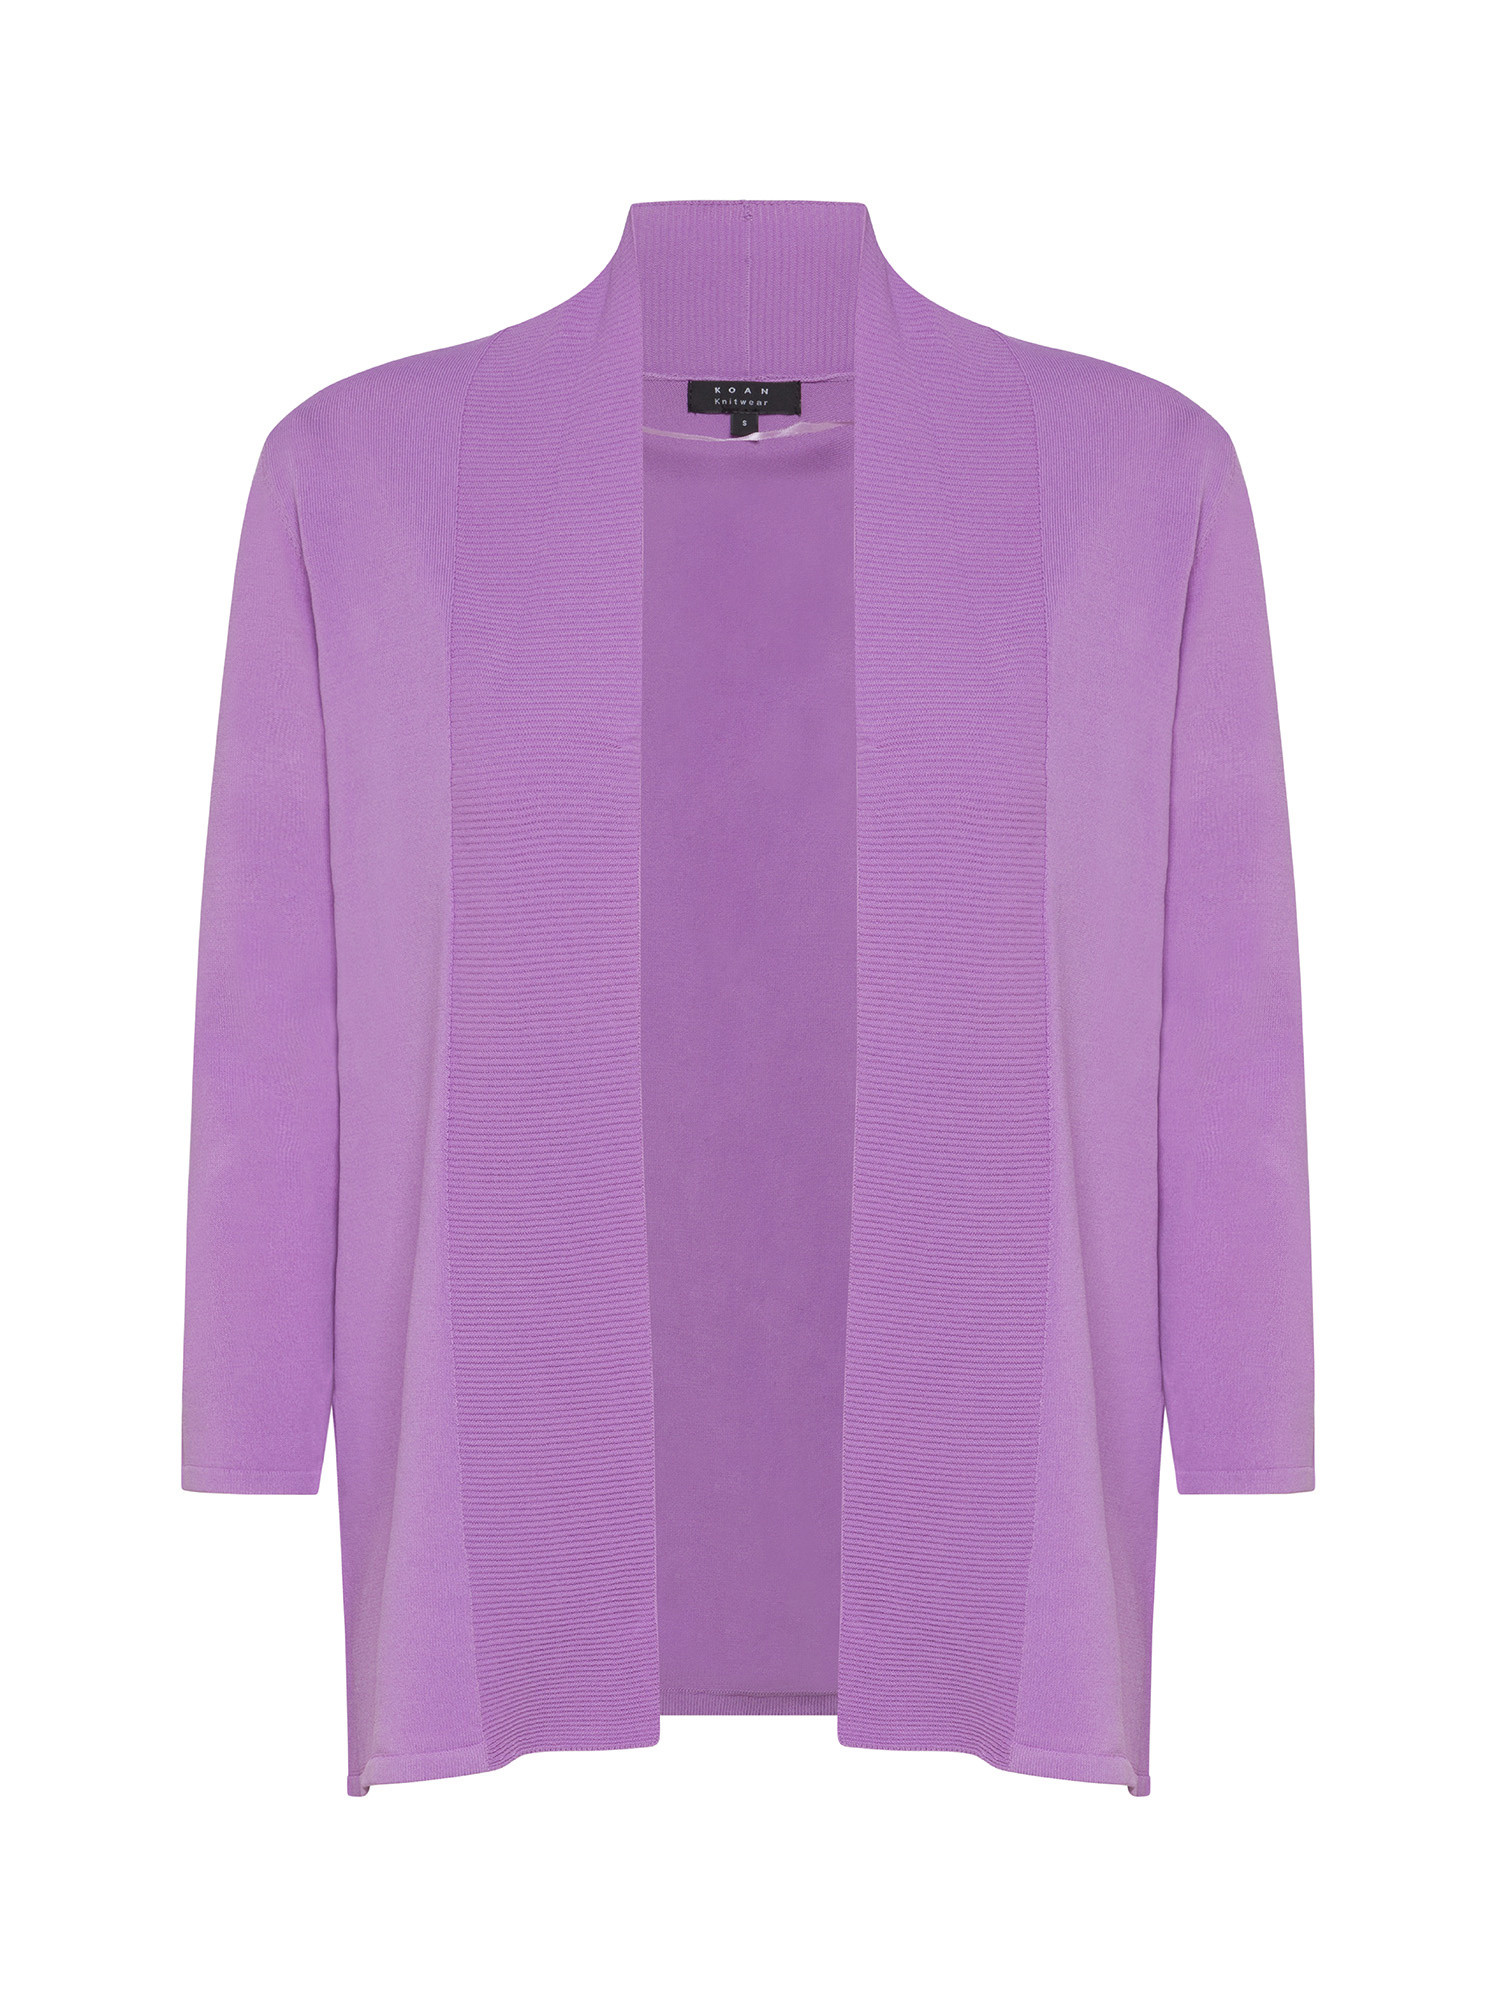 Koan - Cardigan with 3/4 sleeves, Purple Lilac, large image number 0